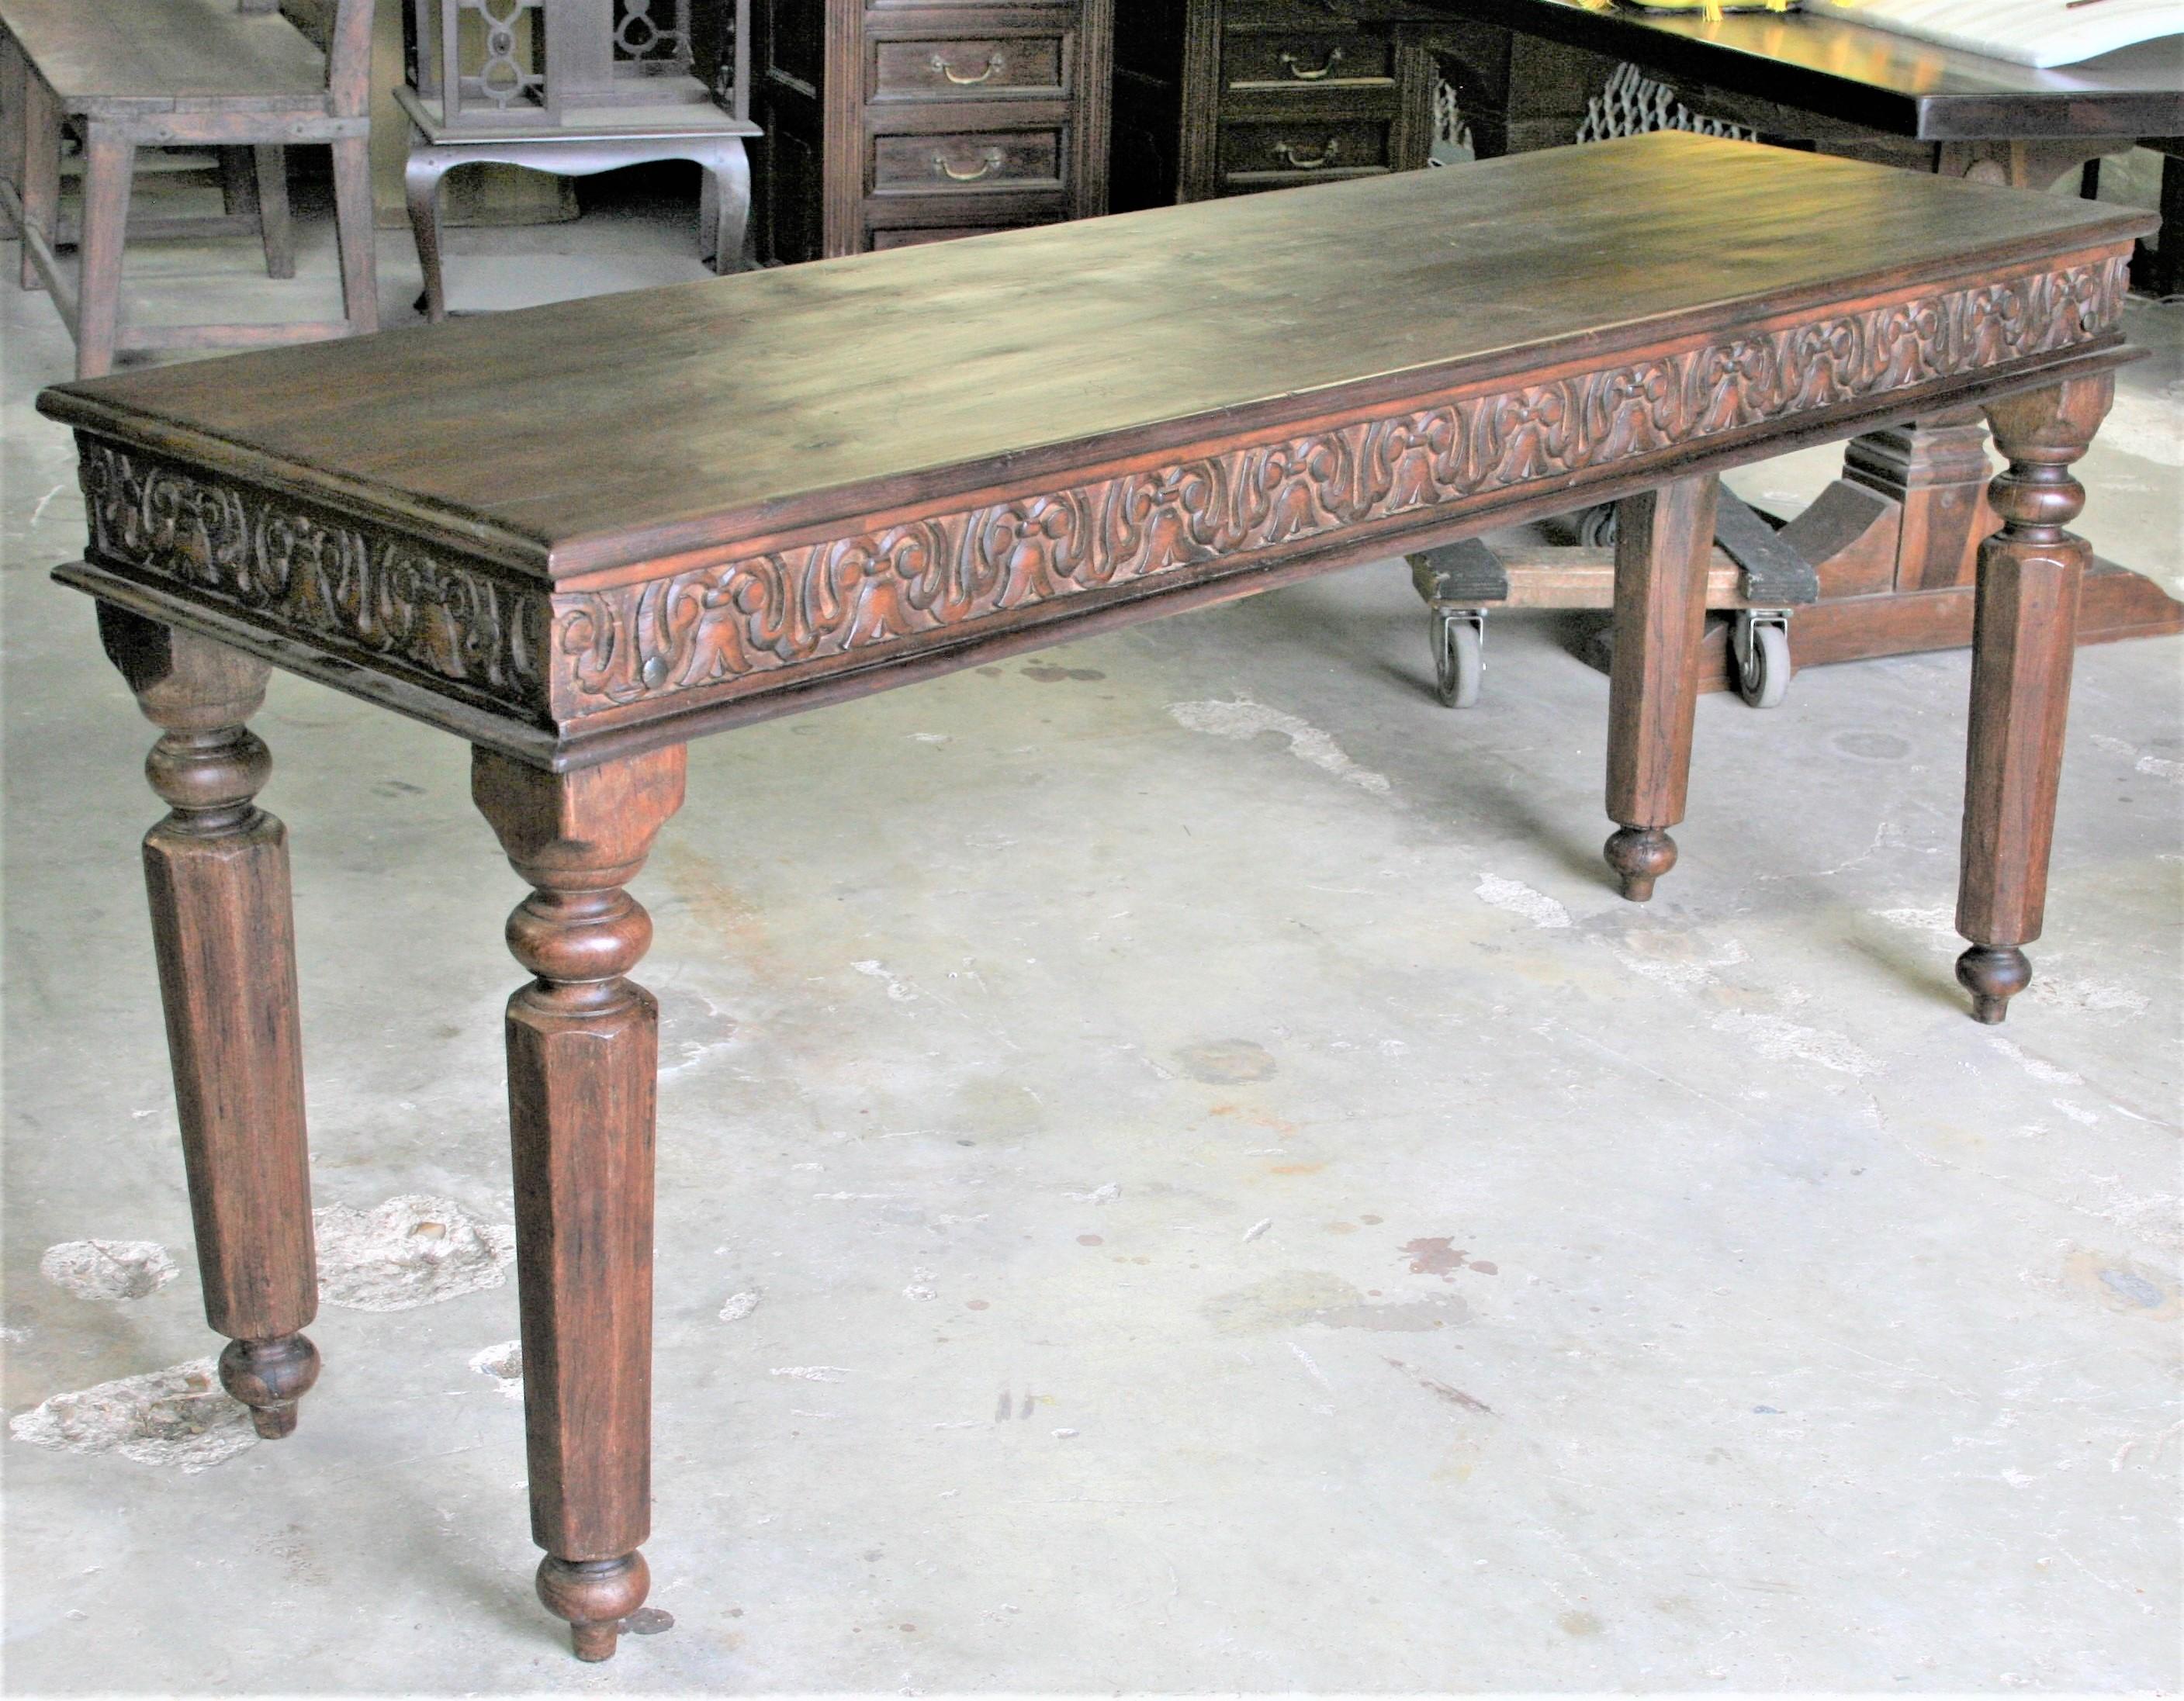 This is a rare colonial piece, used as a sofa table or as a console table in the large high ceilinged colonial homes.
It is made of fine teak wood and with carved sides and finely hand carved sturdy legs. Will last several decades.
Ideal for entry